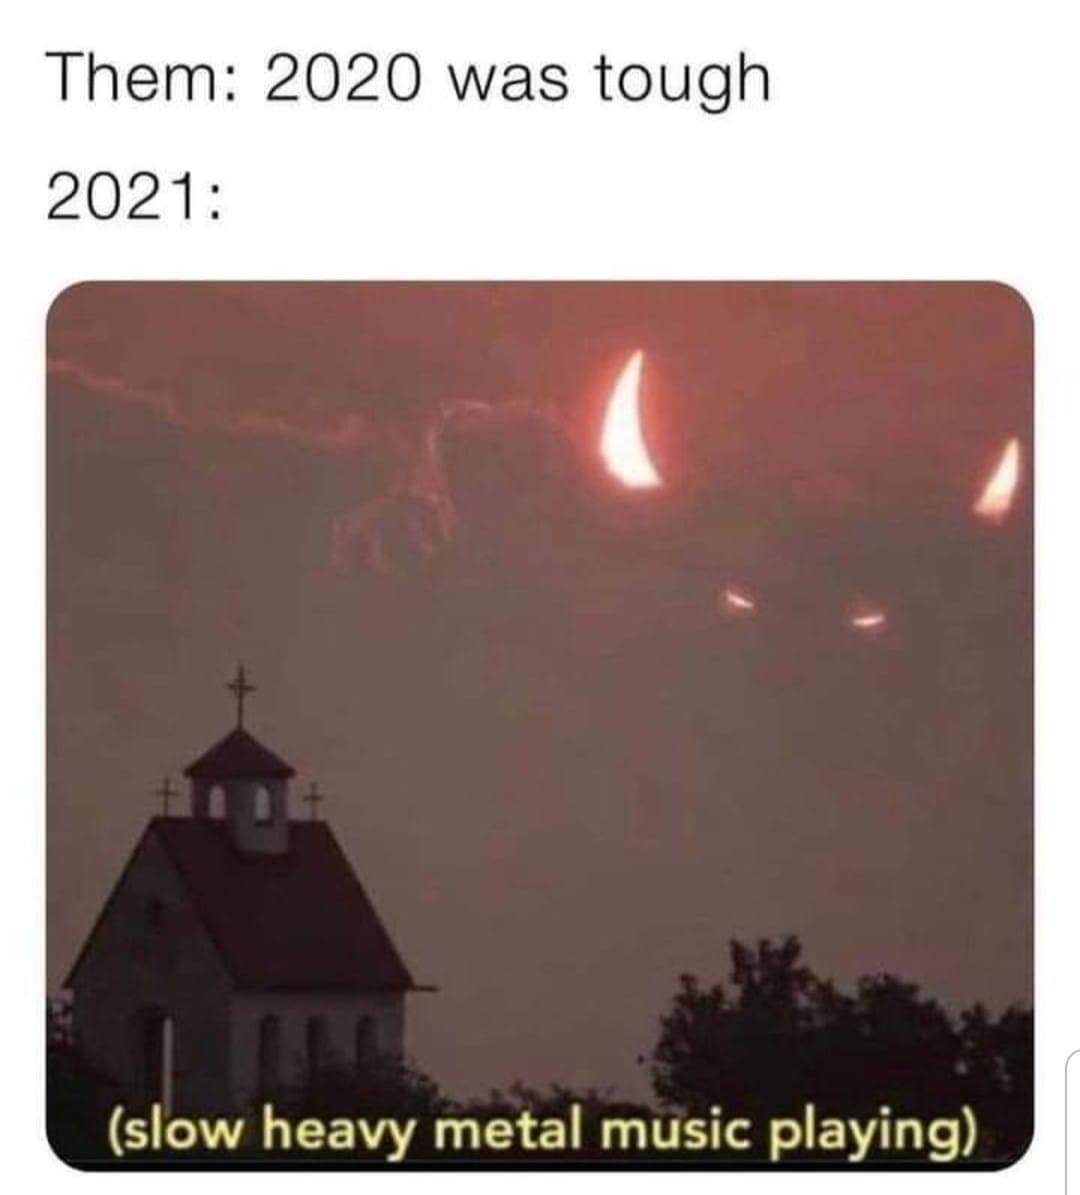 2021 heavy metal memes - Them 2020 was tough 2021 slow heavy metal music playing